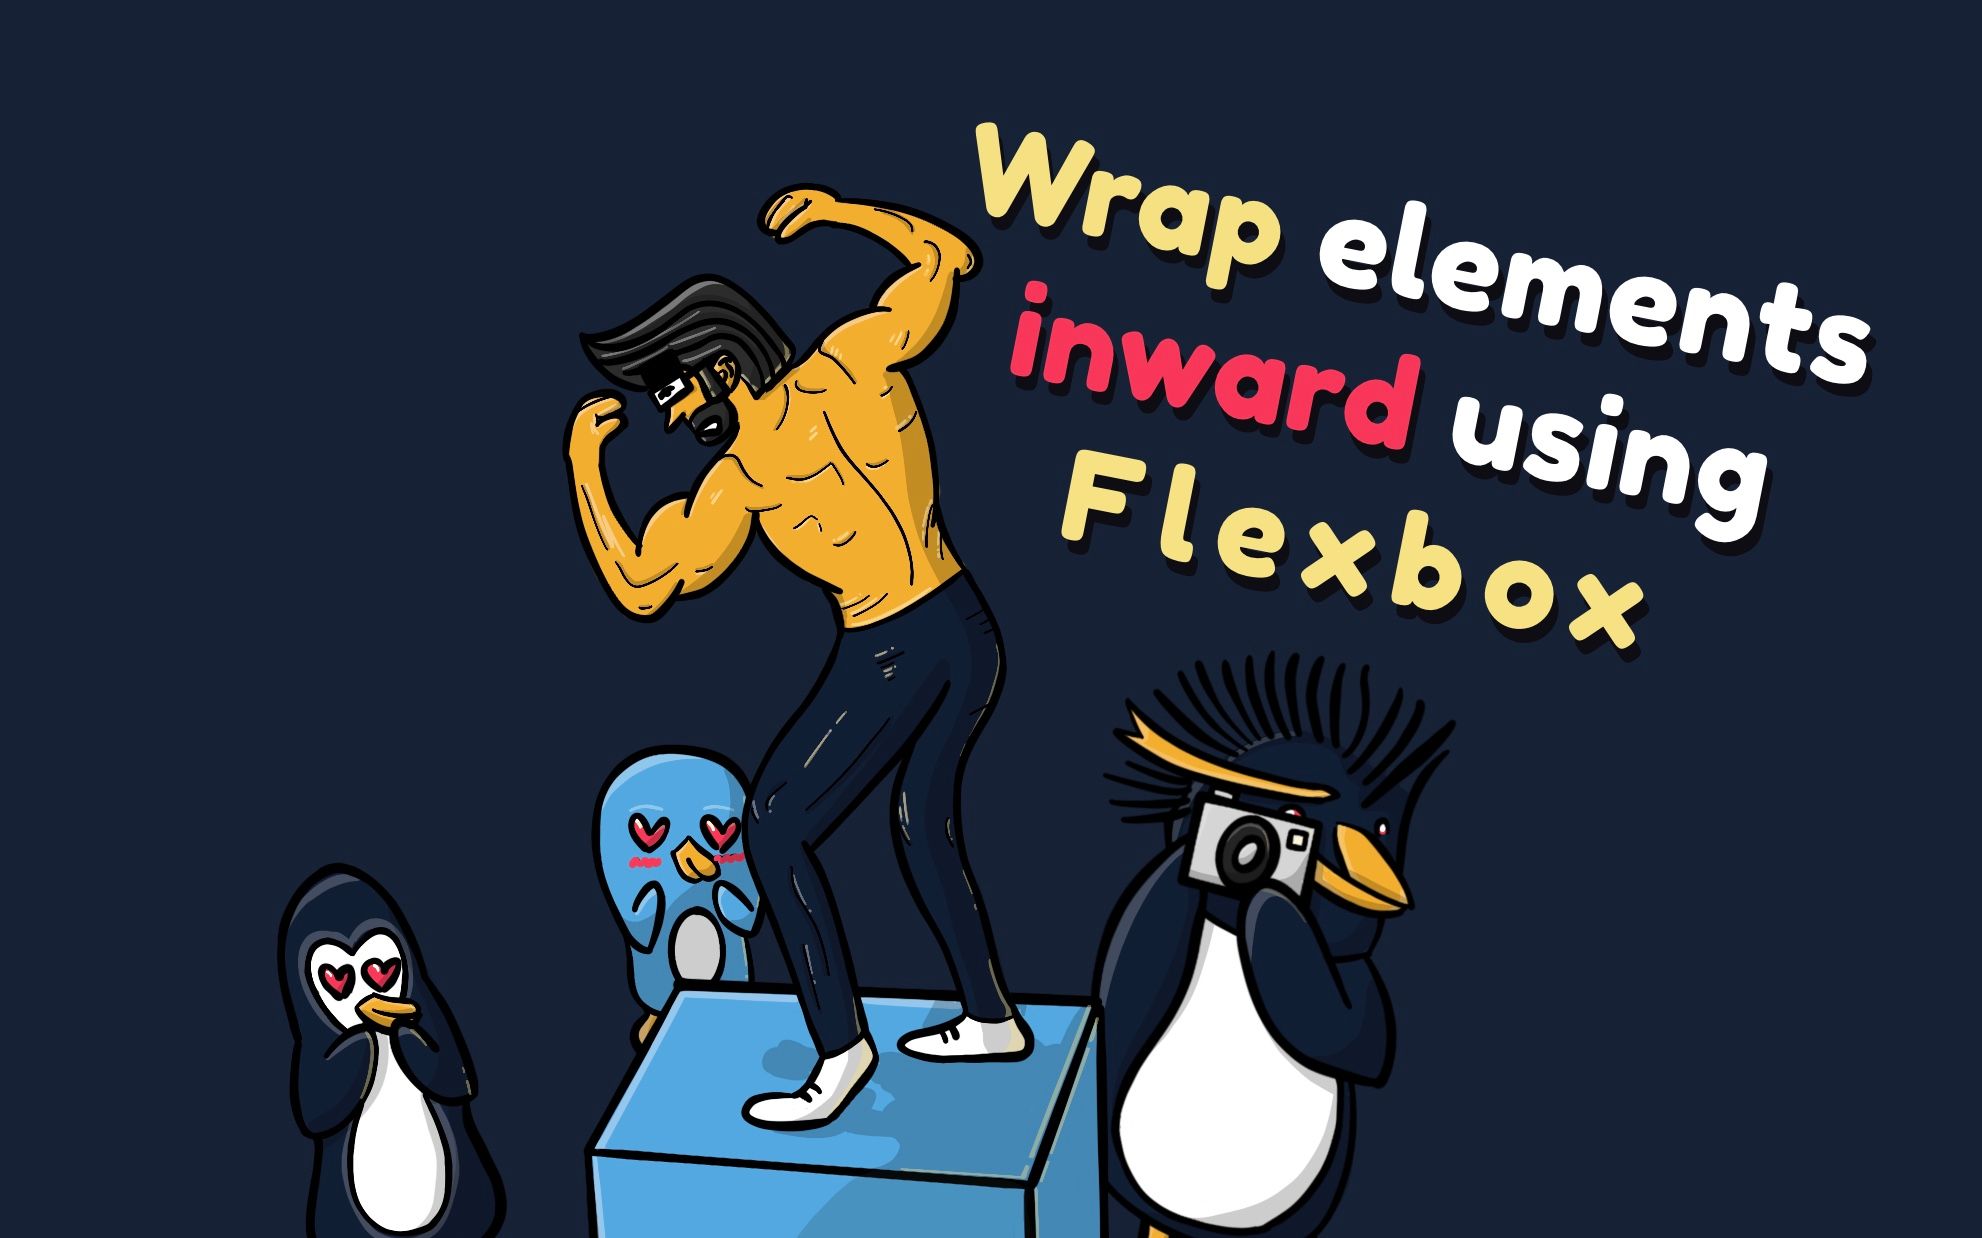 How to make the first and last elements wrap inwards using flexbox